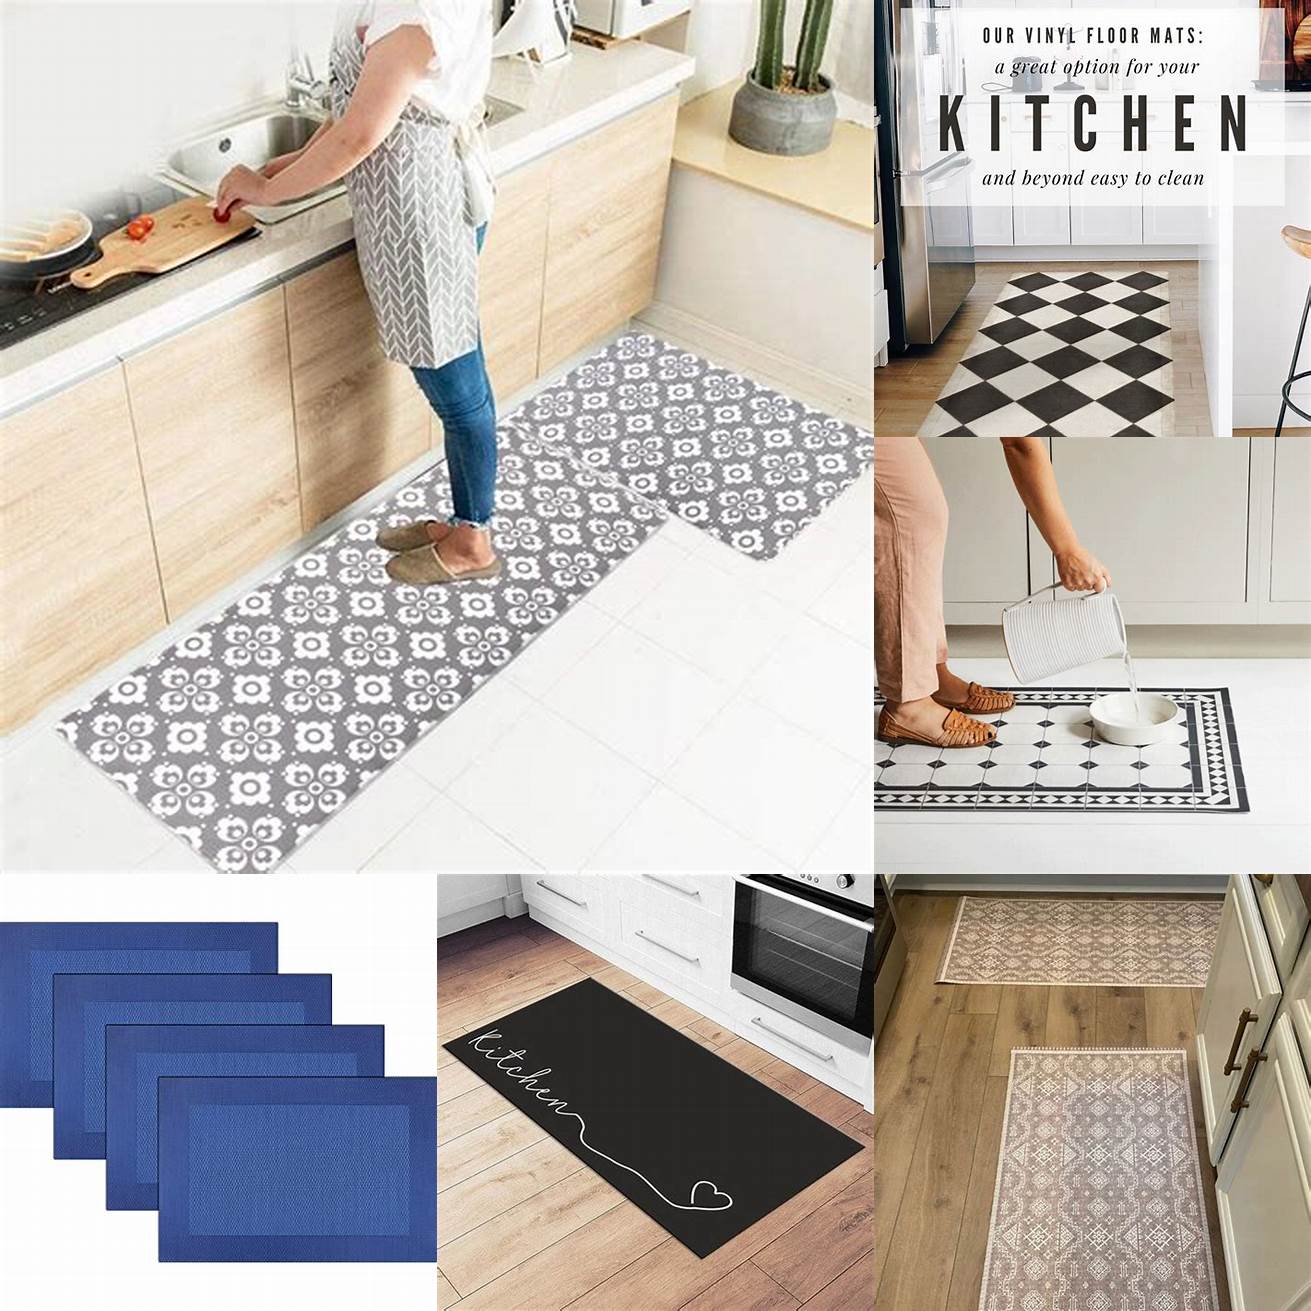 2 Vinyl Vinyl mats are lightweight easy to clean and come in different colors and designs They are ideal for home kitchens